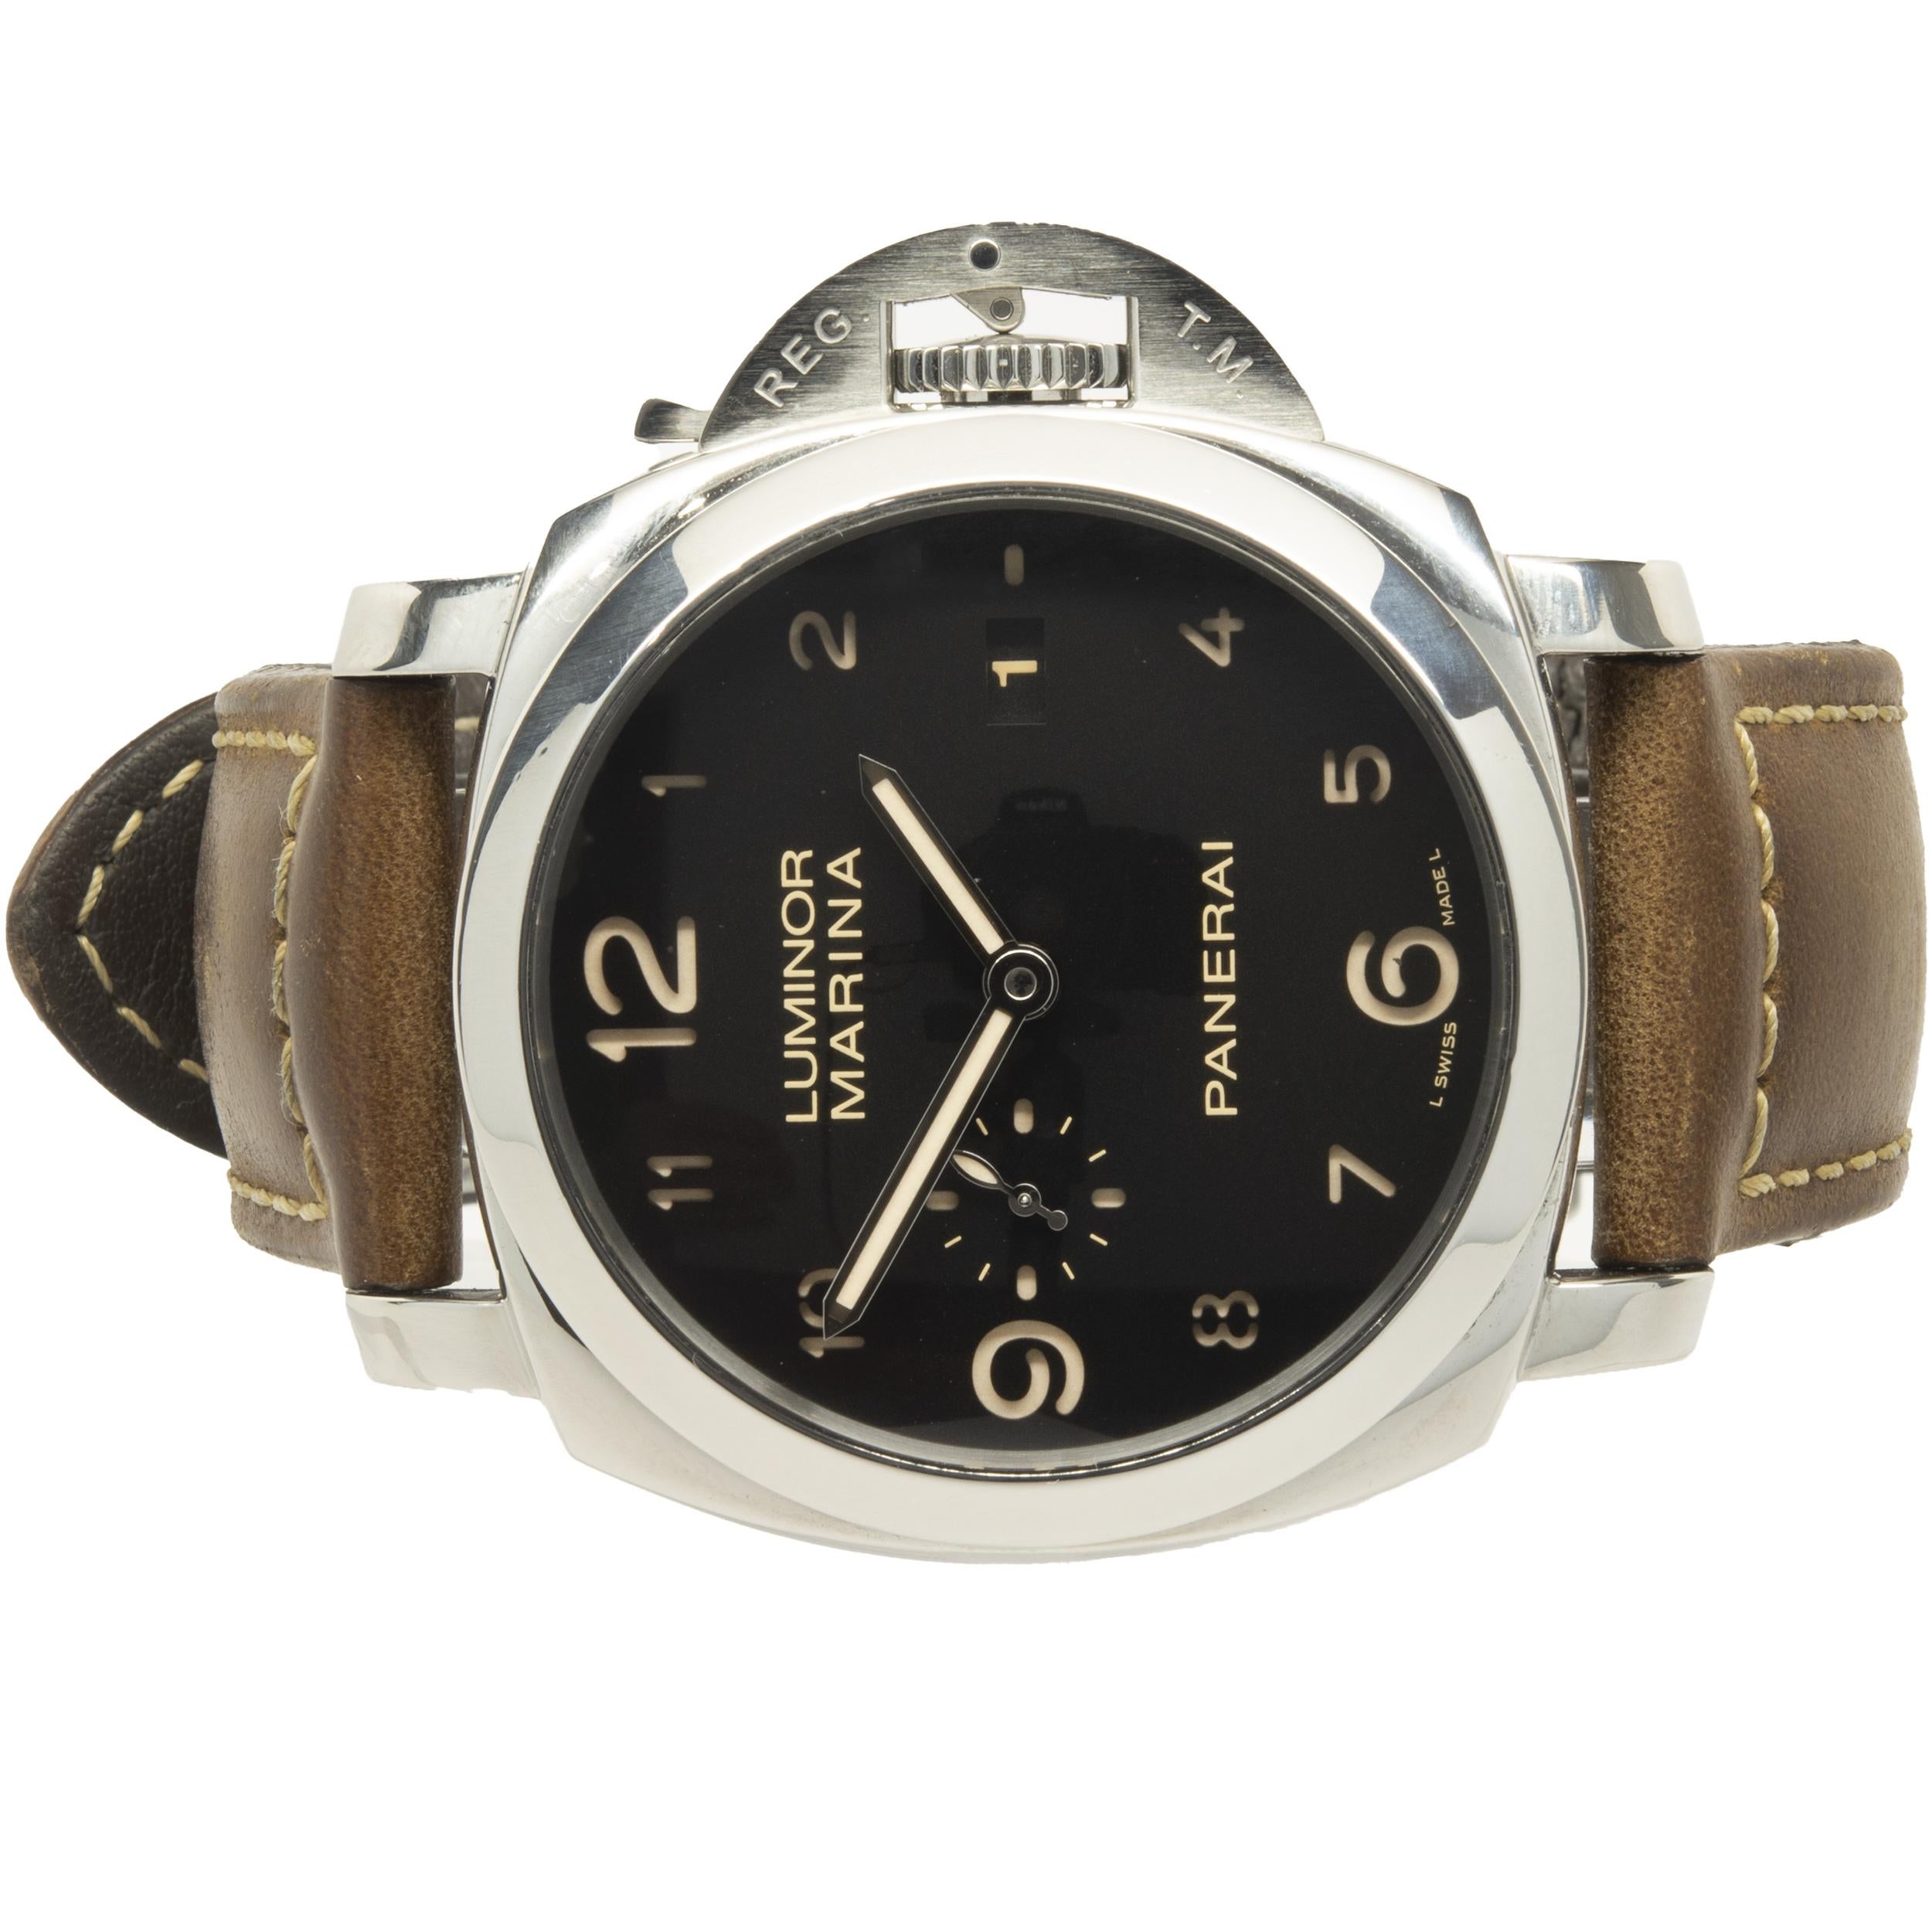 Movement: automatic
Function: hour, minute, small seconds, date
Case: 44mm stainless steel case, sapphire crystal, smooth bezel, push-pull crown
Band: brown leather strap, stainless steel buckle
Dial: tobacco dial, Arabic/stick
Reference: PAM